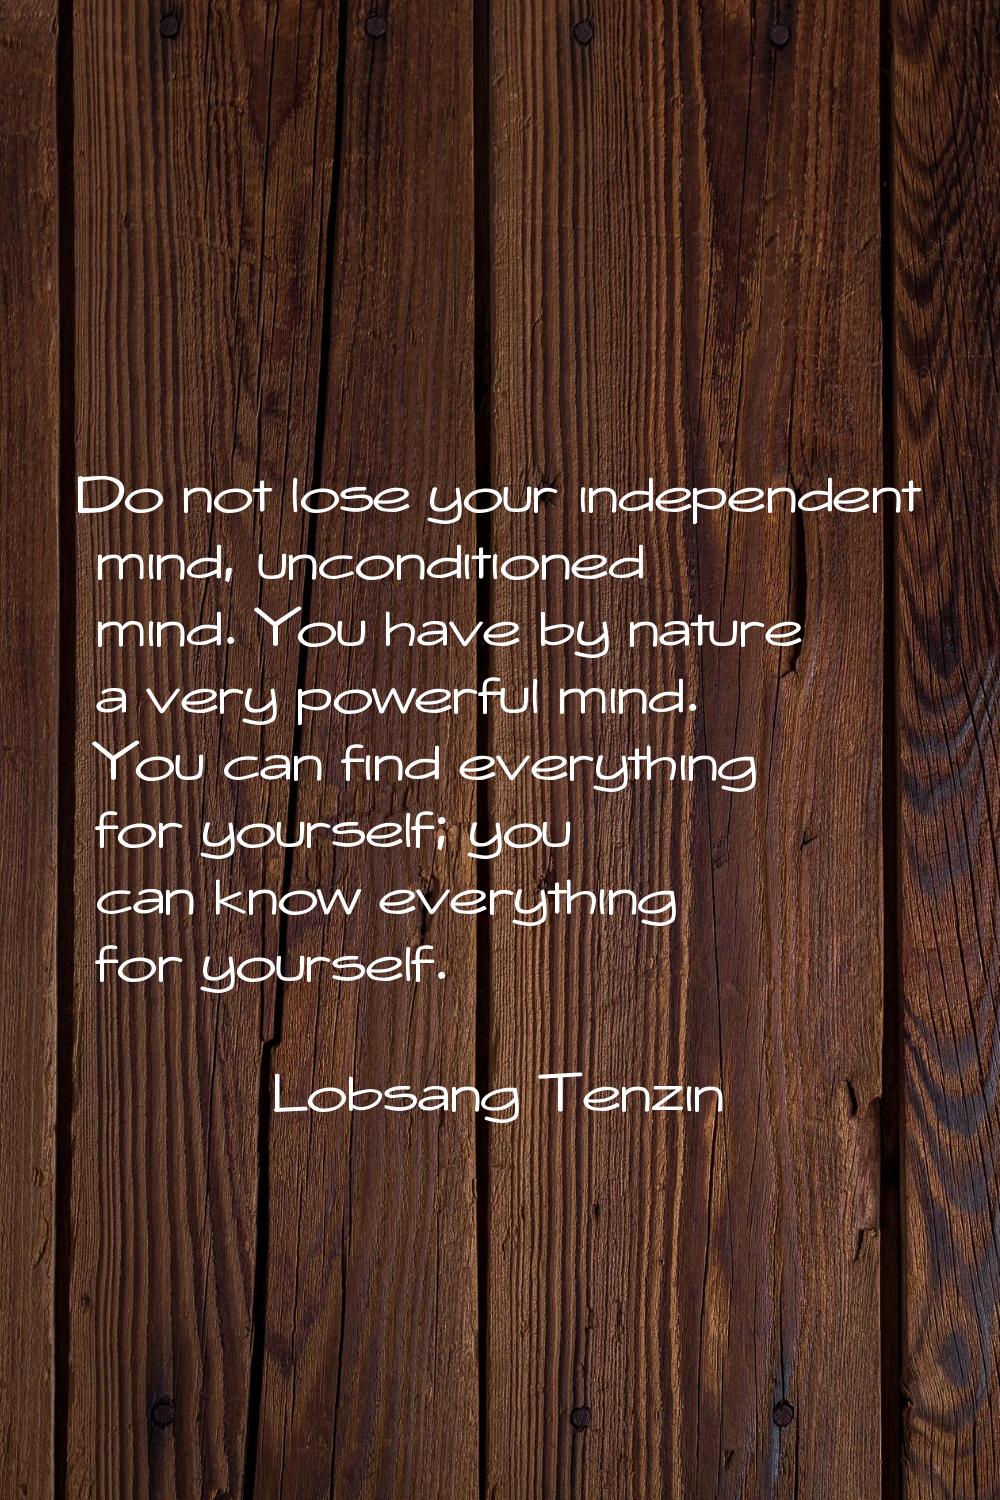 Do not lose your independent mind, unconditioned mind. You have by nature a very powerful mind. You